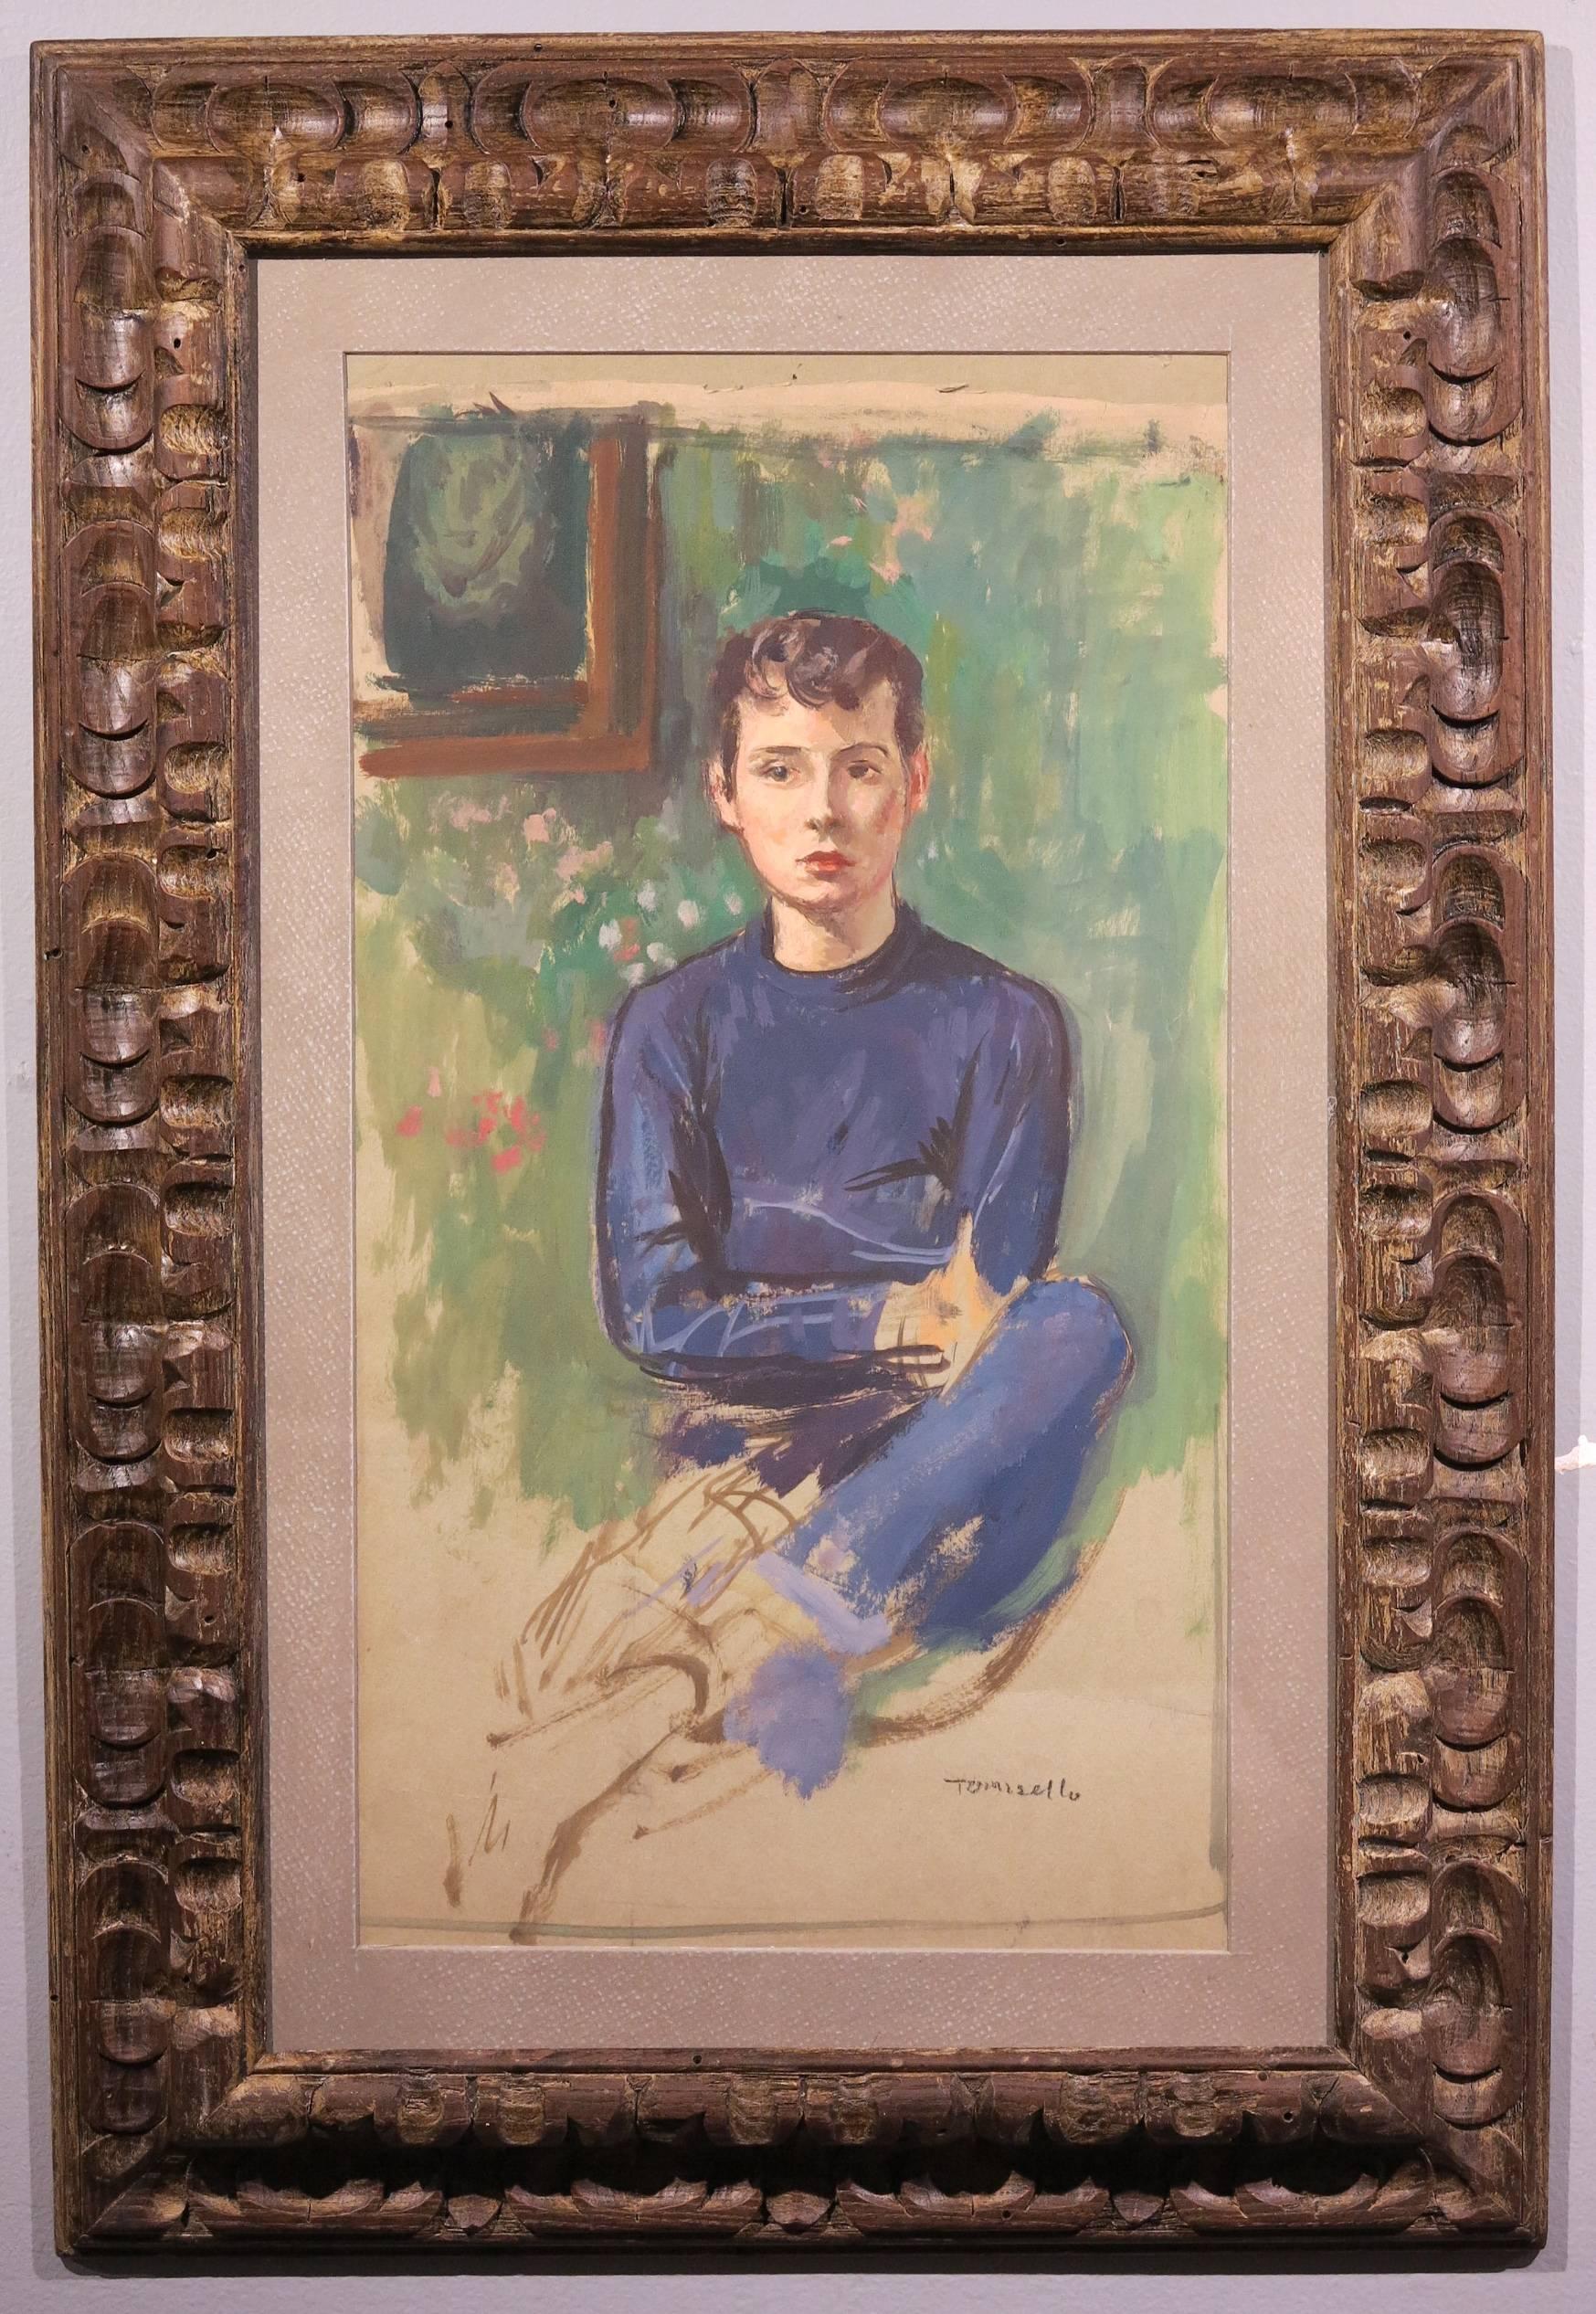 Vito Tomasello Portrait Painting - Portrait of Young Man in Blue